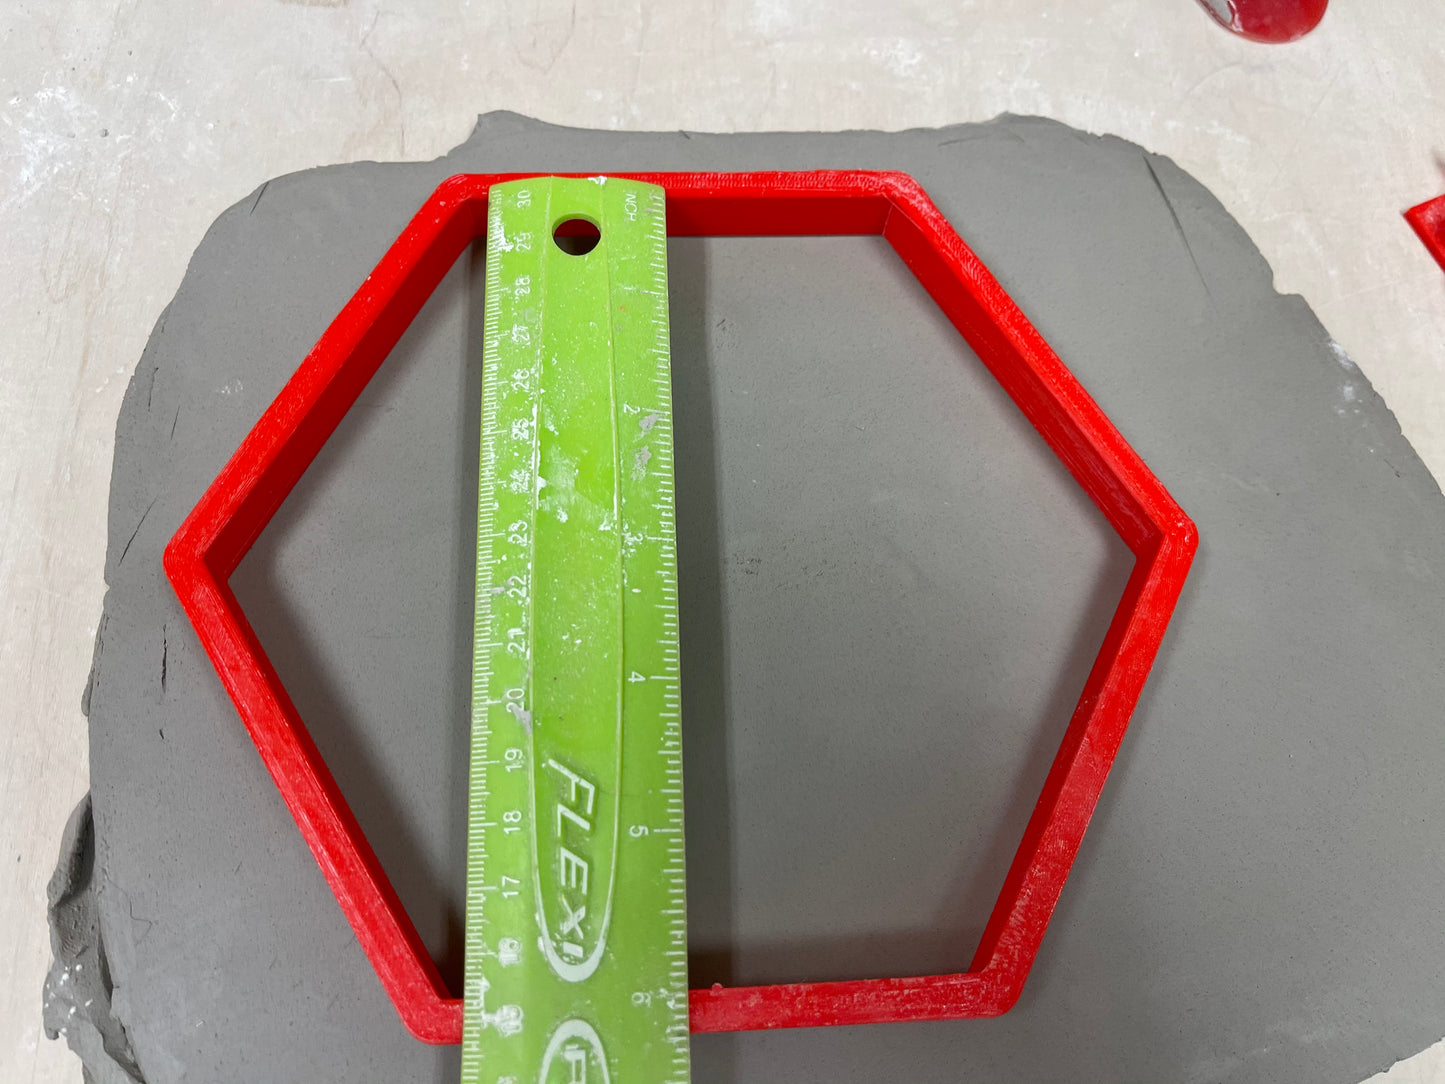 Plain Hexagon, Clay Cutter - plastic 3D printed, XL pottery tool, multiple sizes